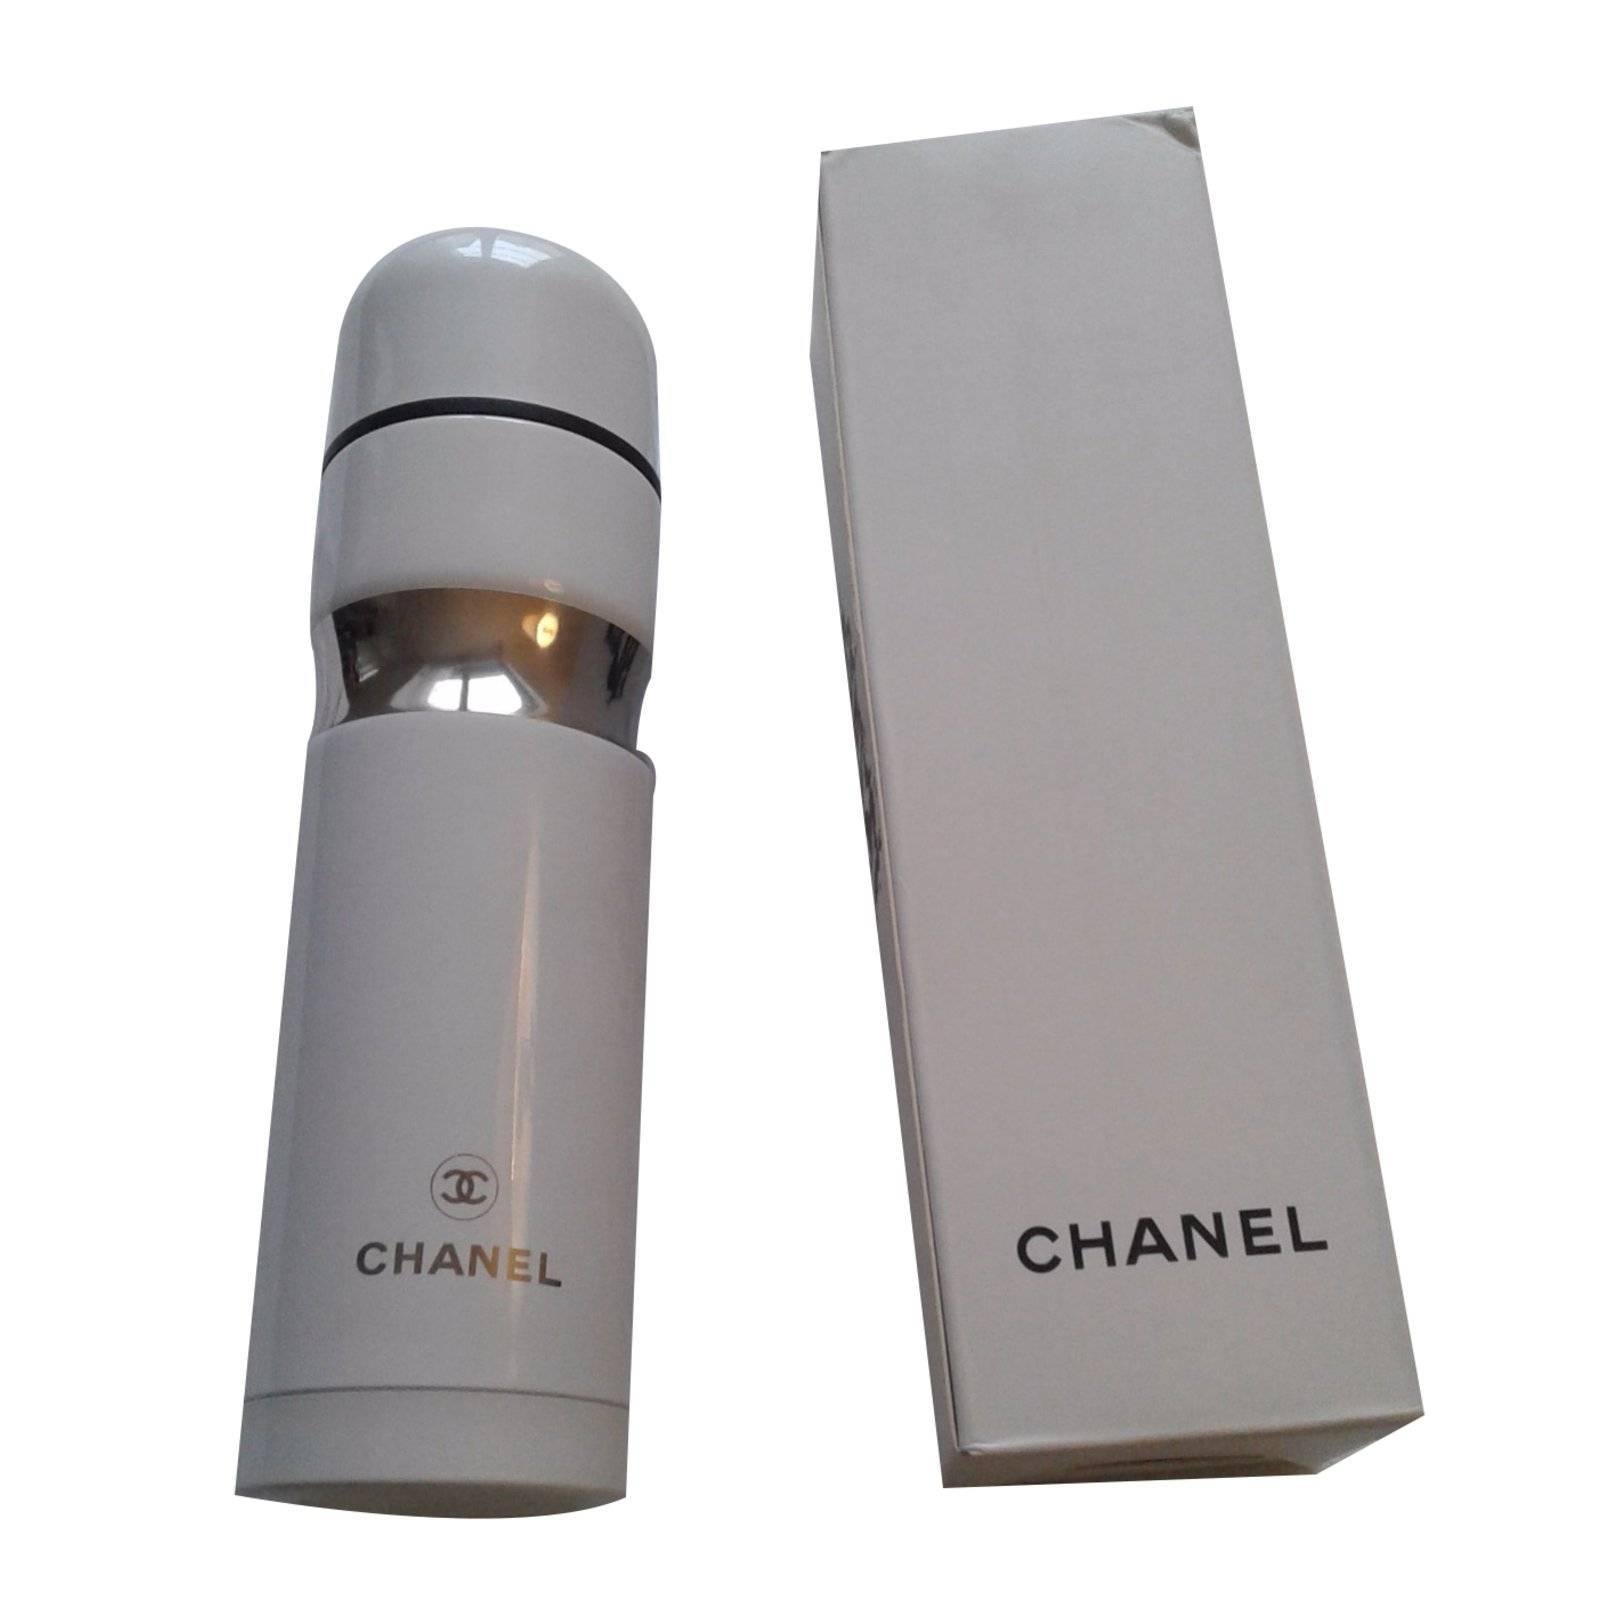 Care for a gold-colored Chanel water bottle with a flask bag for